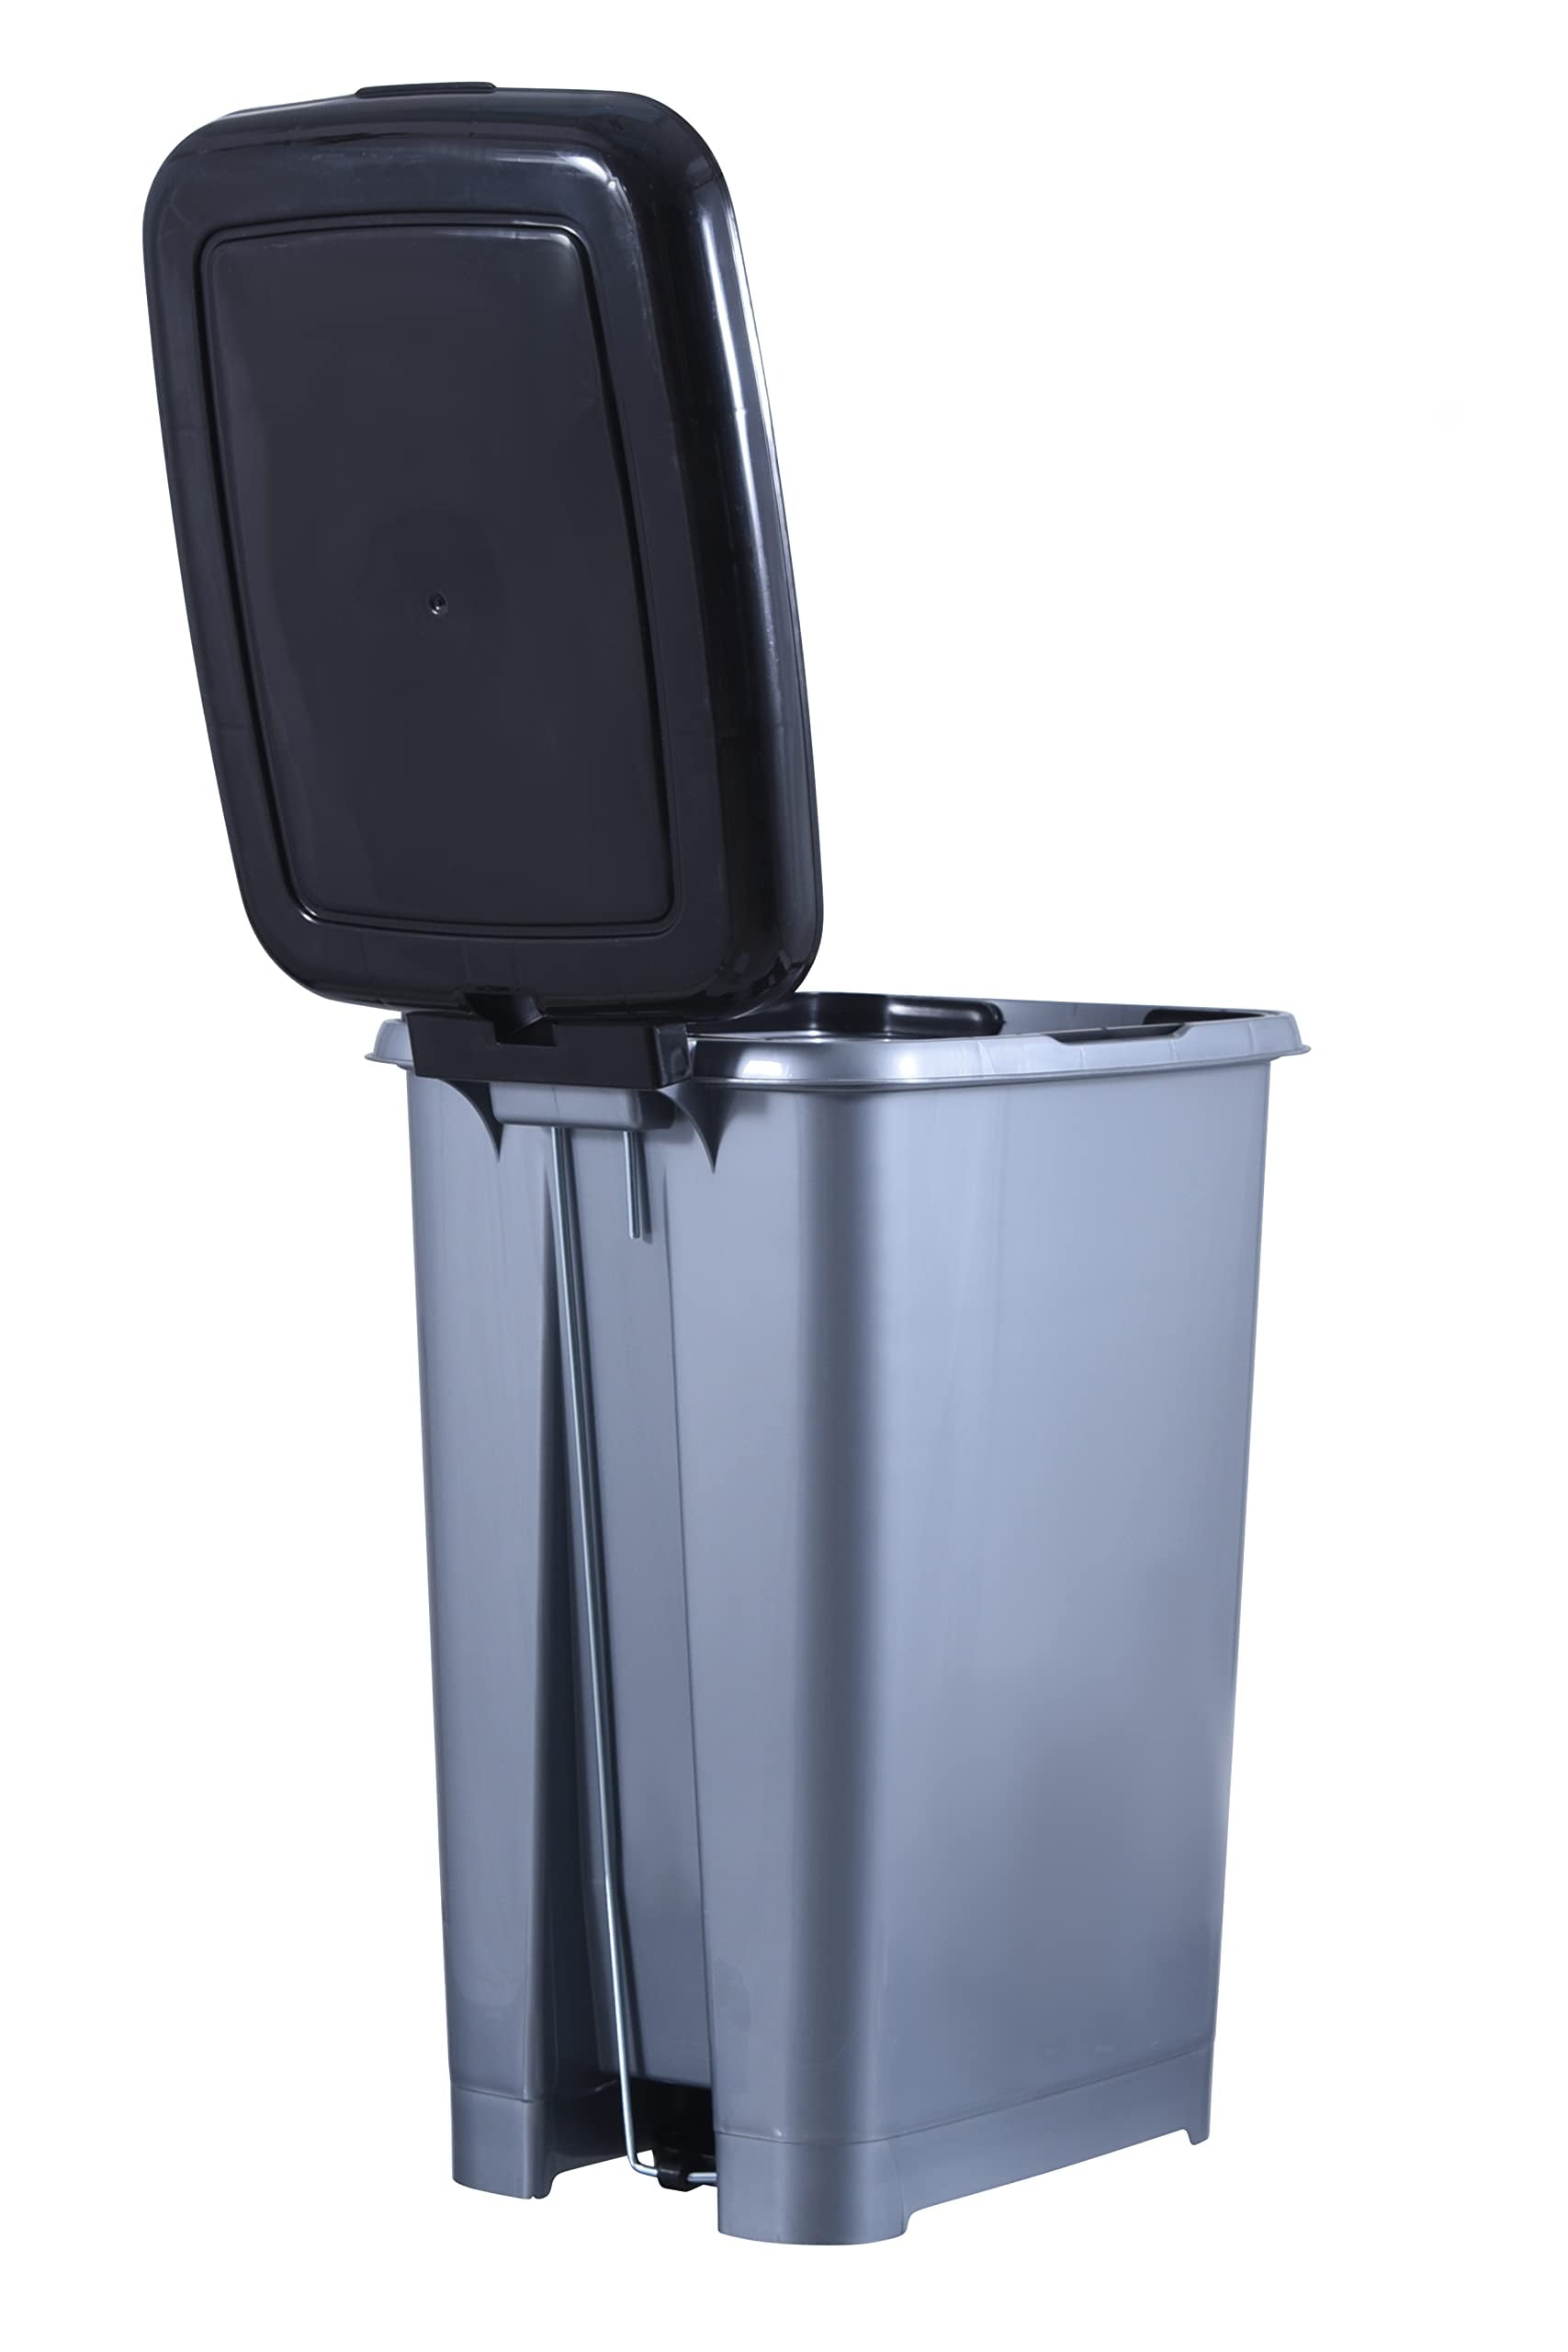 Superio Slim Trash Can with Foot Pedal – 6.5 Gallon Step-On Trash Can with  Lid, Medium Plastic Garbage Can, Trashcan for Bathroom, Kitchen, Office